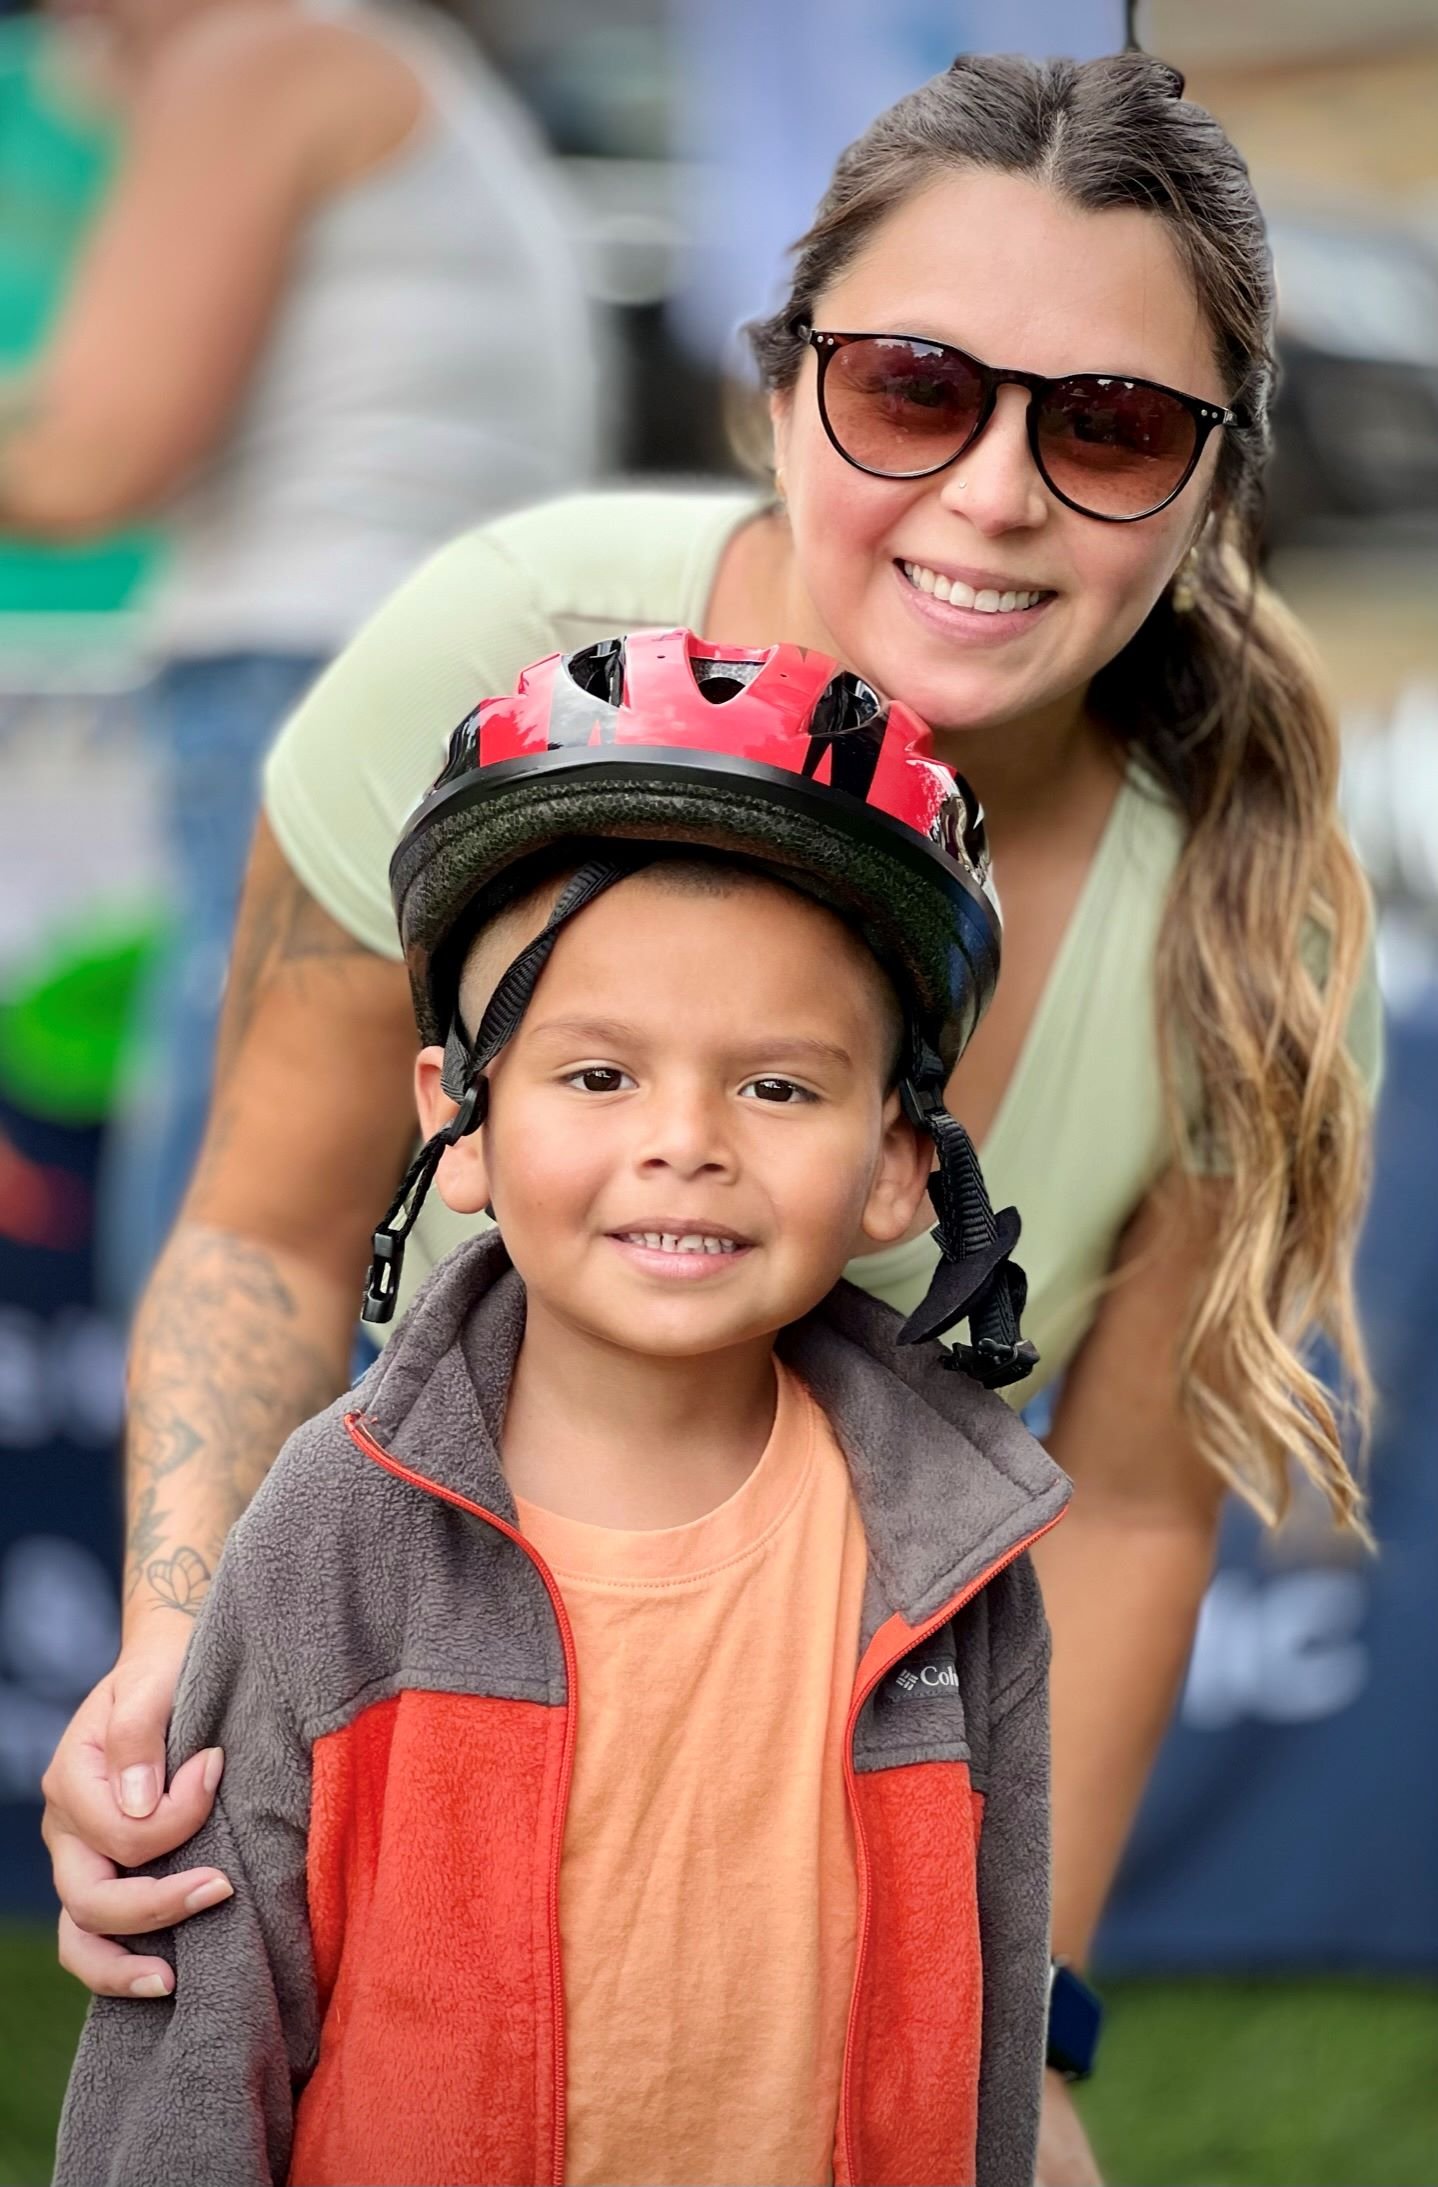 A little boy receives a new bicycle helmet from the Skyline Health Foundation.